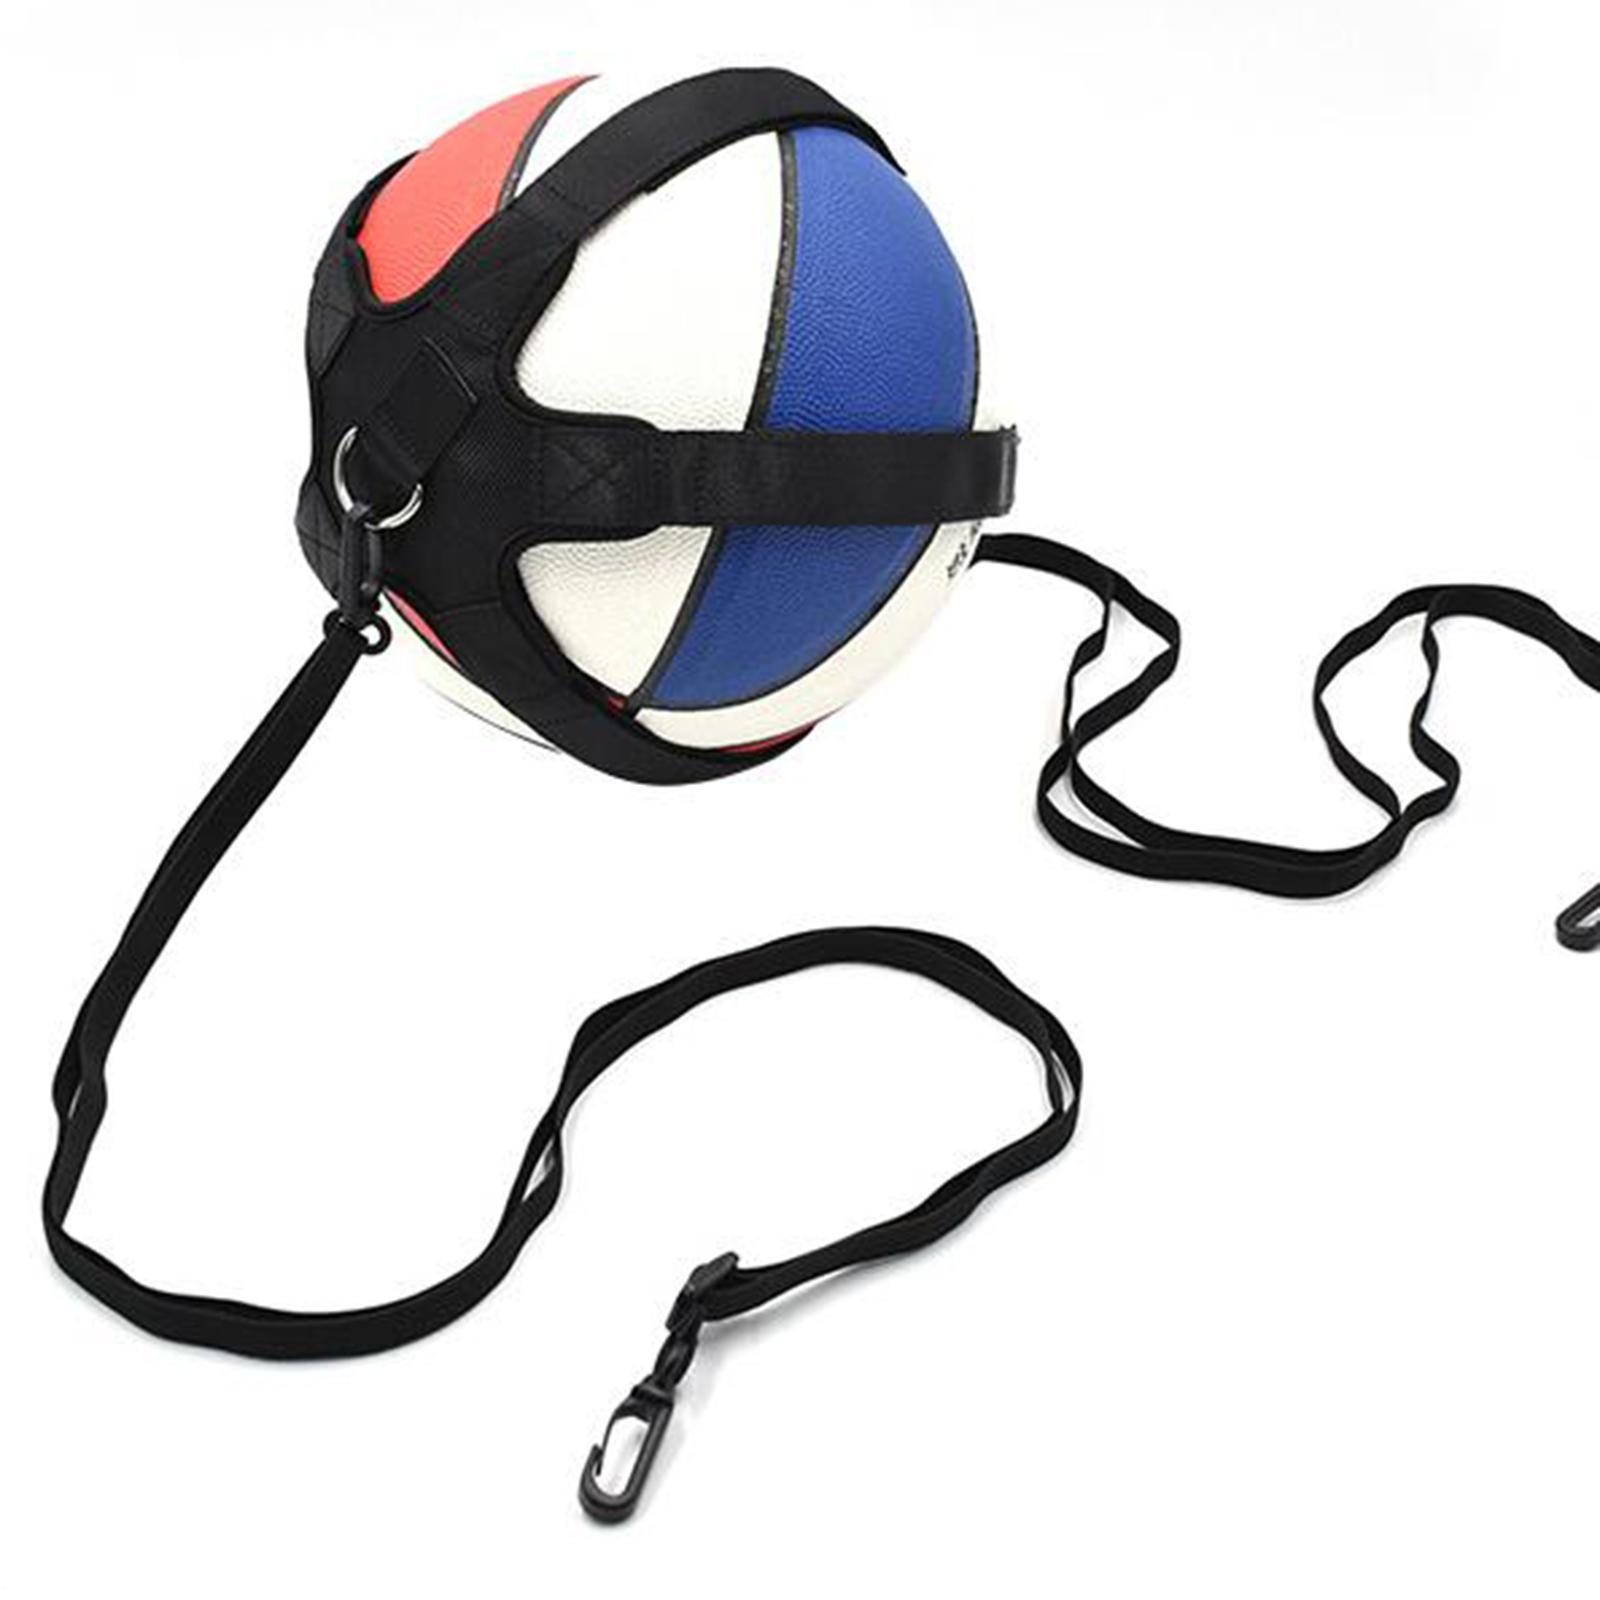 Volleyball Training Equipment Adjustable Teen Girls Boys for Beginners Playing Improves Serving